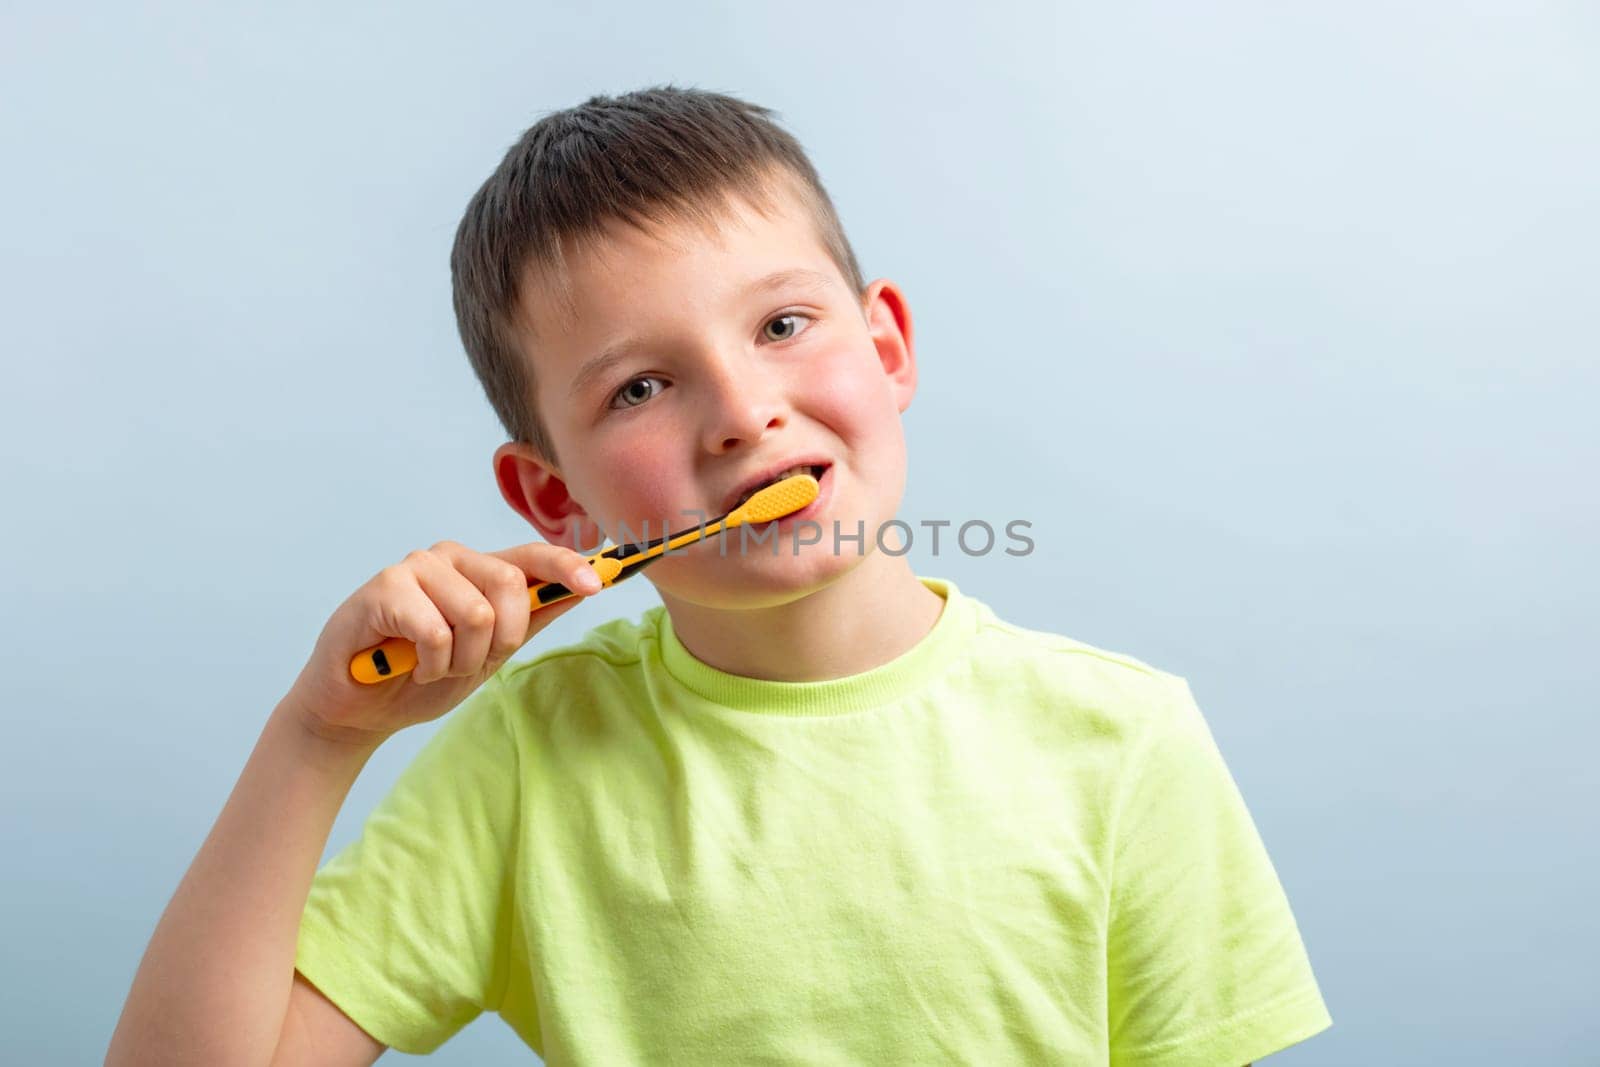 A child in t-shirt brushing teeth with toothbrush on blue background. Dental hygiene.